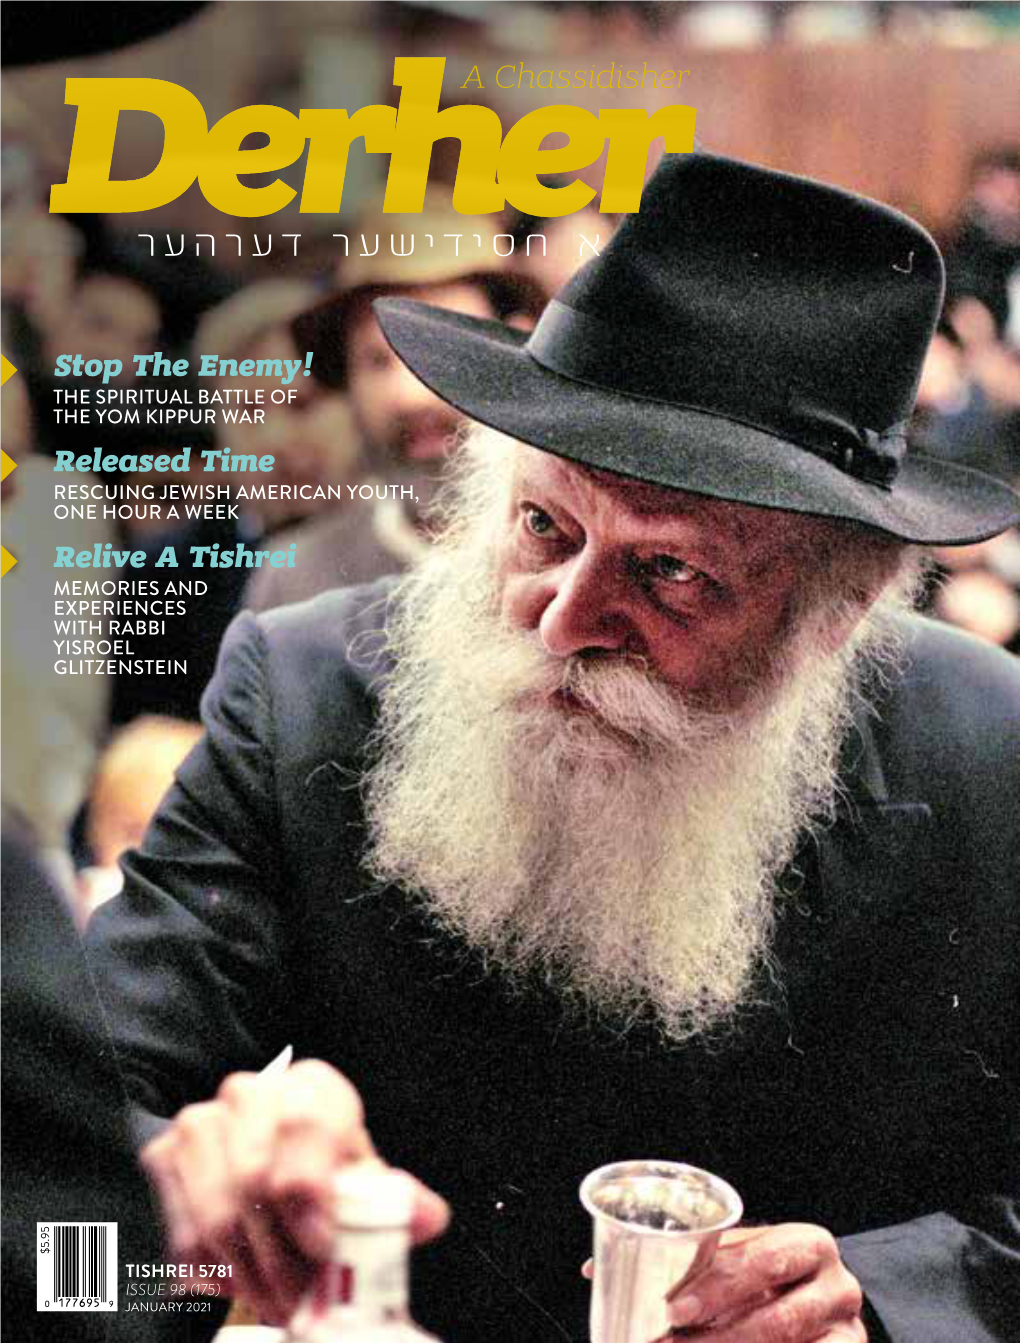 TISHREI 5781 ISSUE 98 (175) JANUARY 2021 DO YOU DERHER? a CHASSIDISHER DERHER Available in Stores, Or Delivered to Your Door!